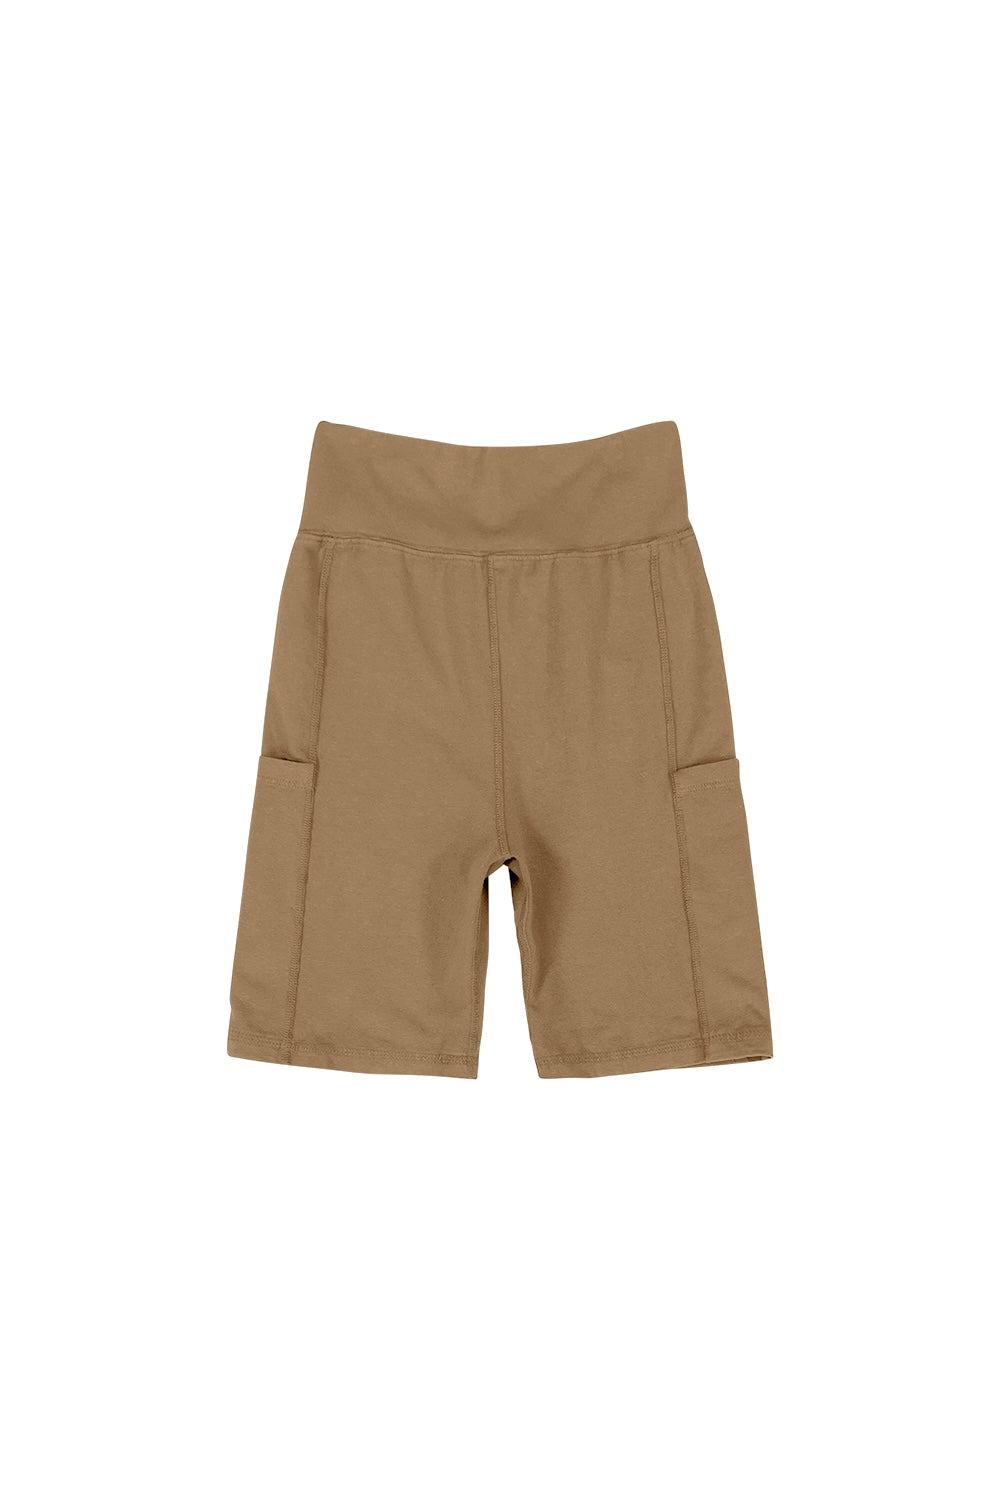 Bike Short with Pockets | Jungmaven Hemp Clothing & Accessories / Color: Coyote